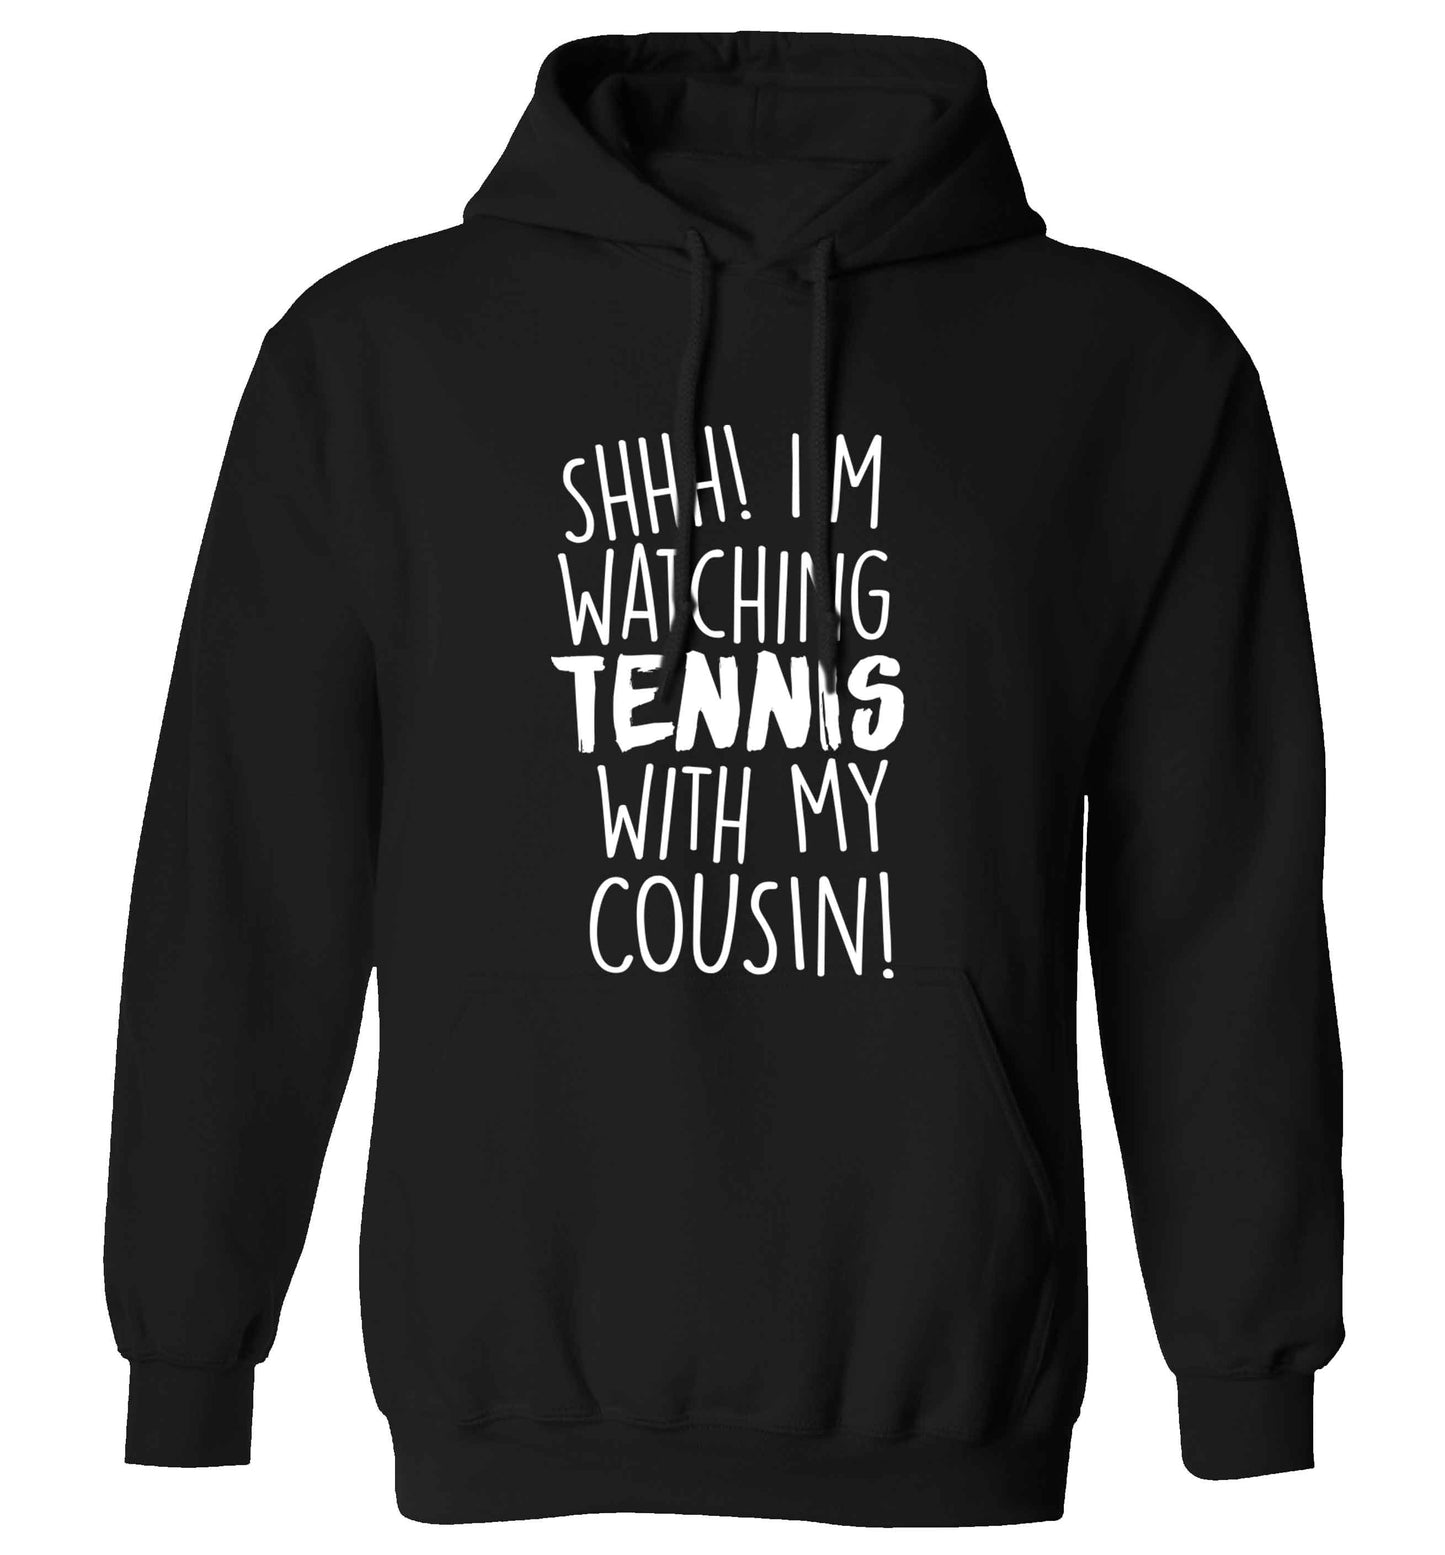 Shh! I'm watching tennis with my cousin! adults unisex black hoodie 2XL